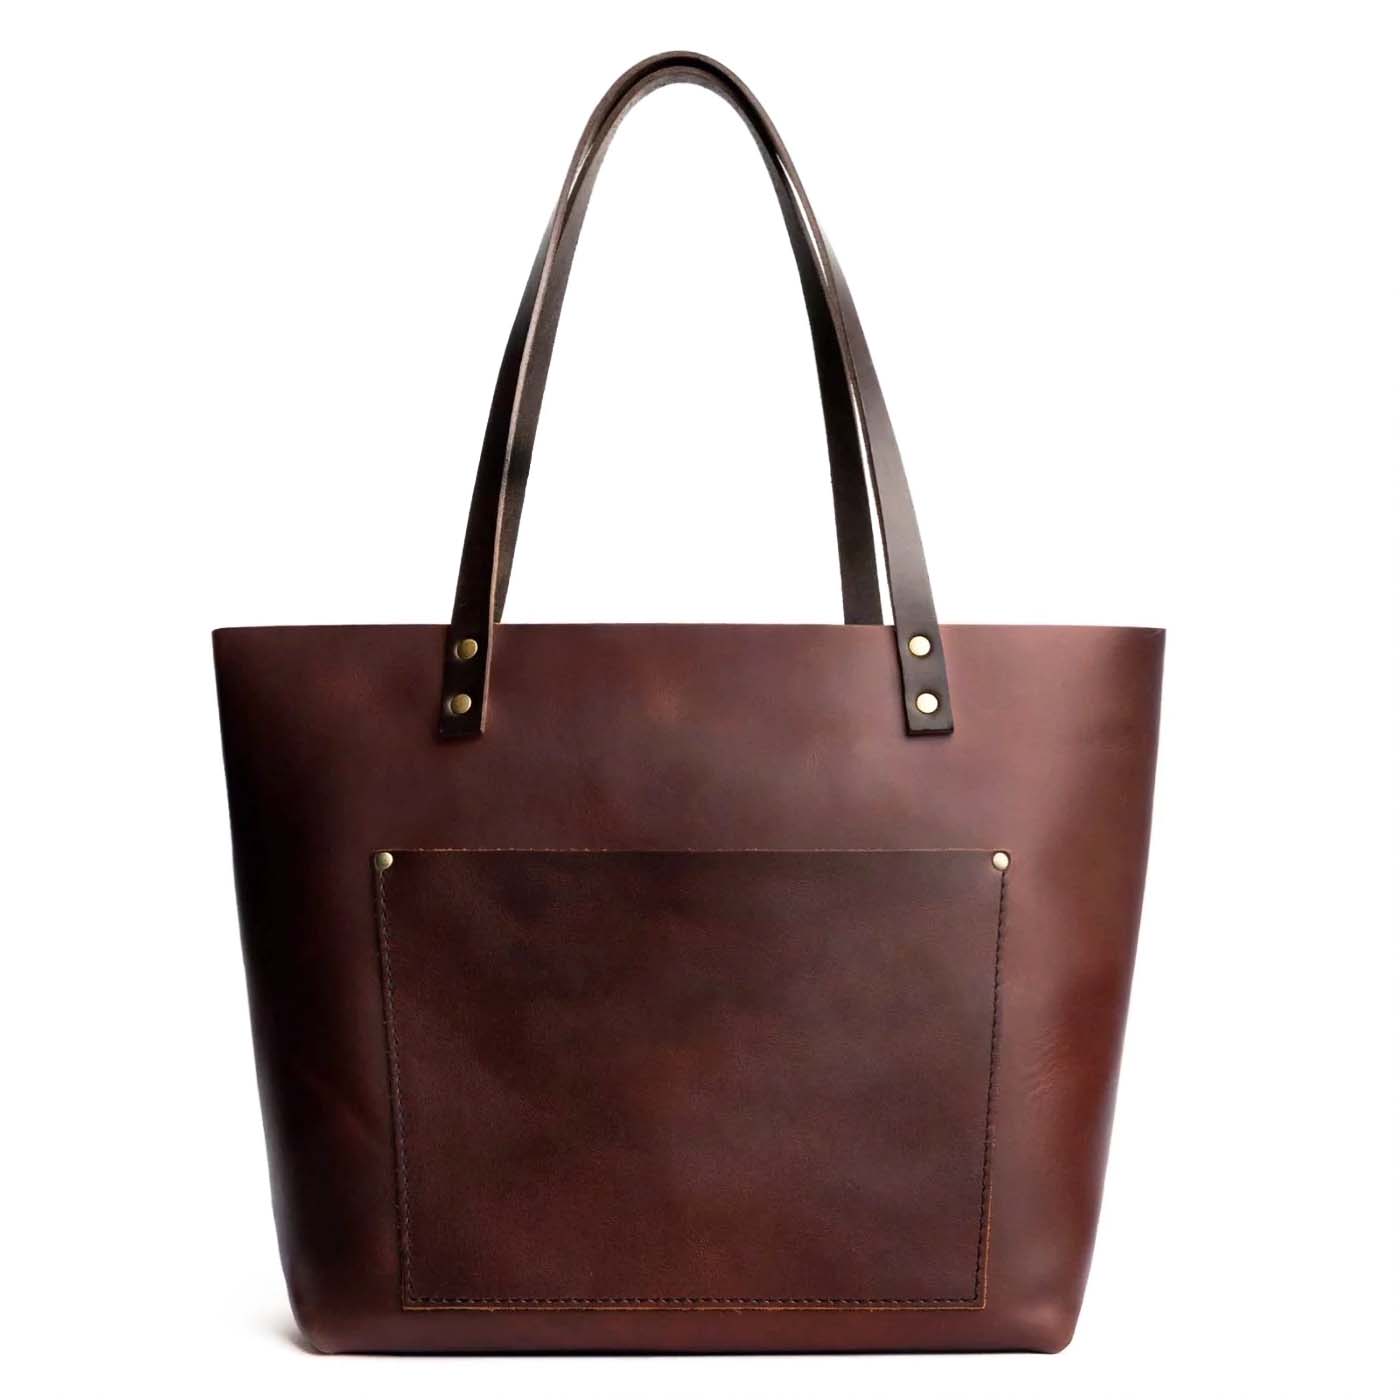 Talamone | Women's tote bag in leather color light grey – Il Bisonte